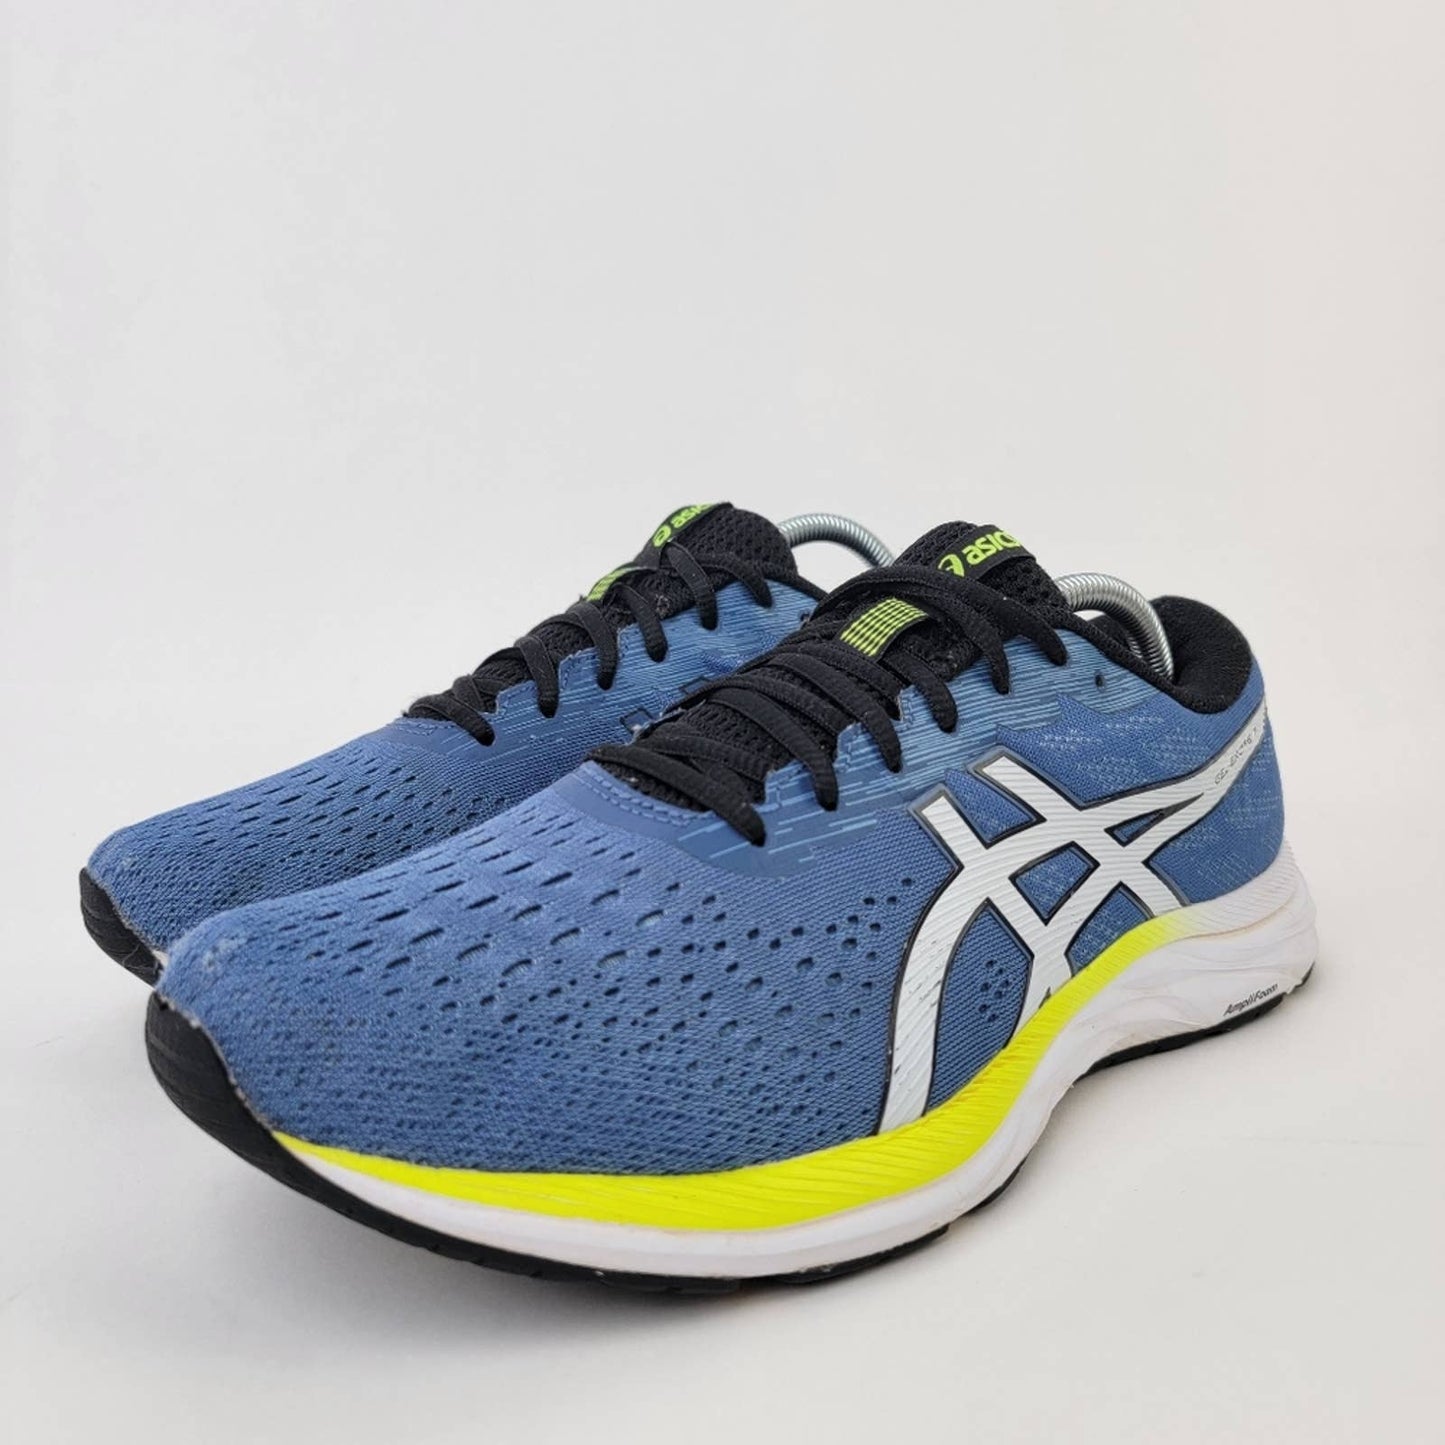 Asics Gel Excite 7 Running Shoes - 10.5